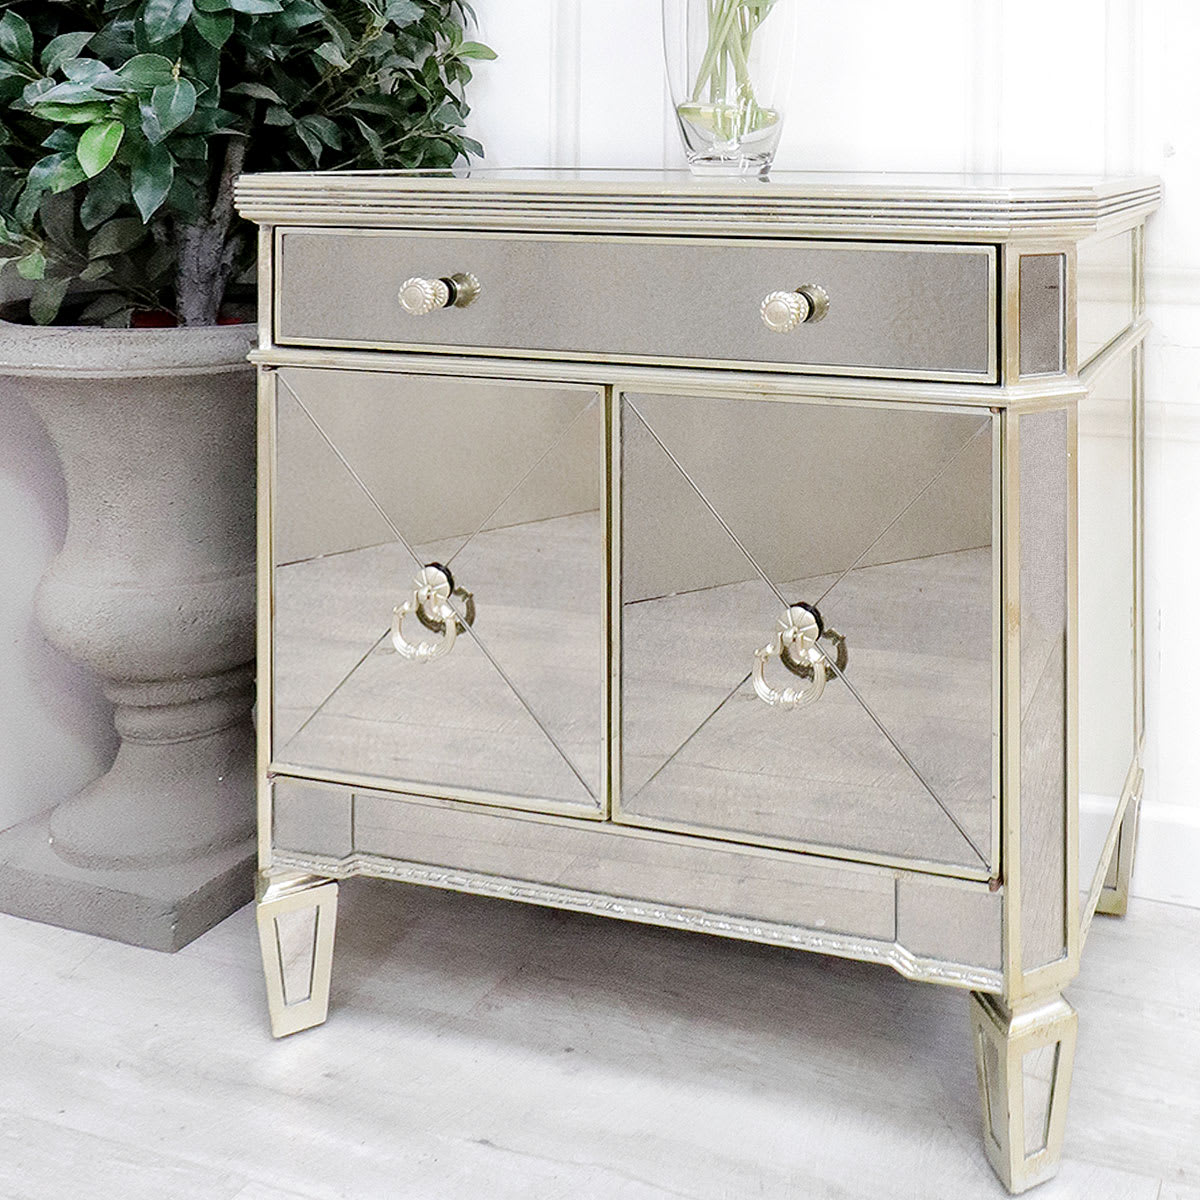 Antique Style Venetian Mirrored Small Sideboard